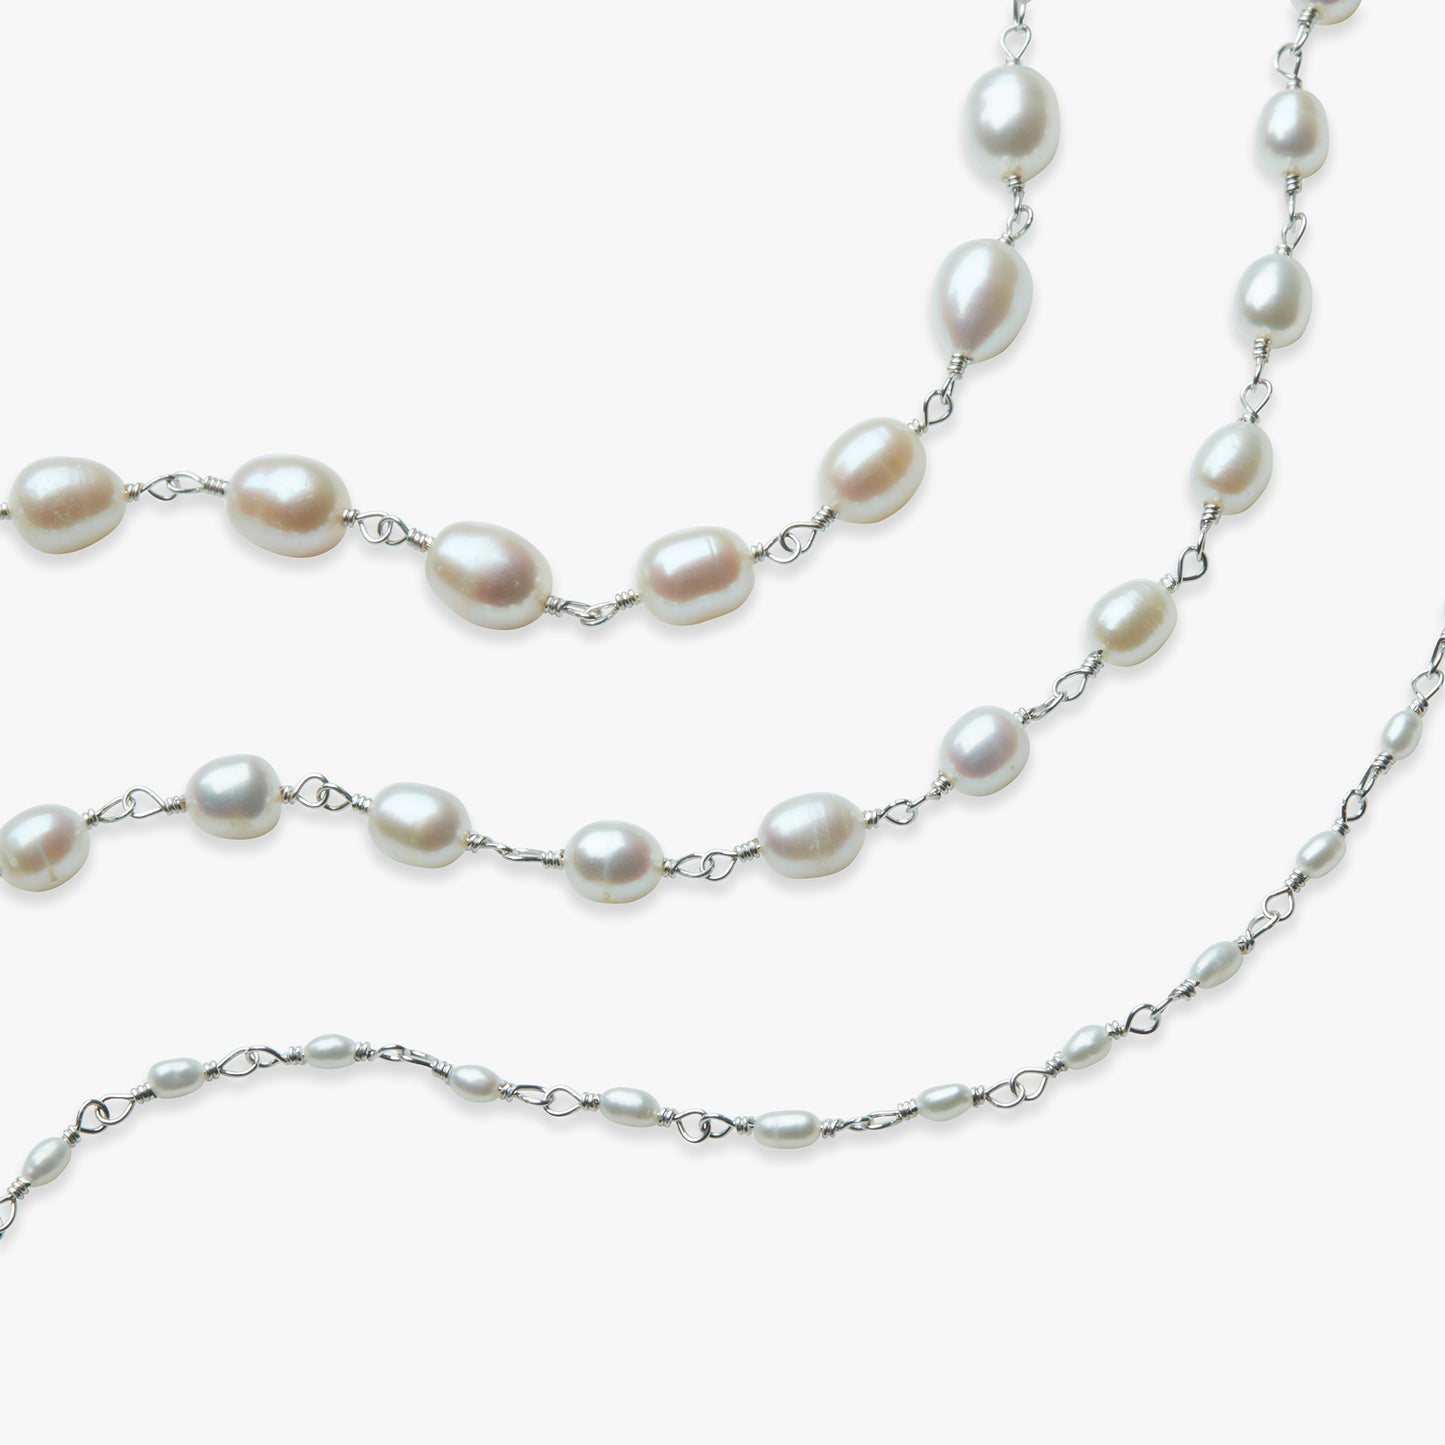 Pearl rosary necklace silver